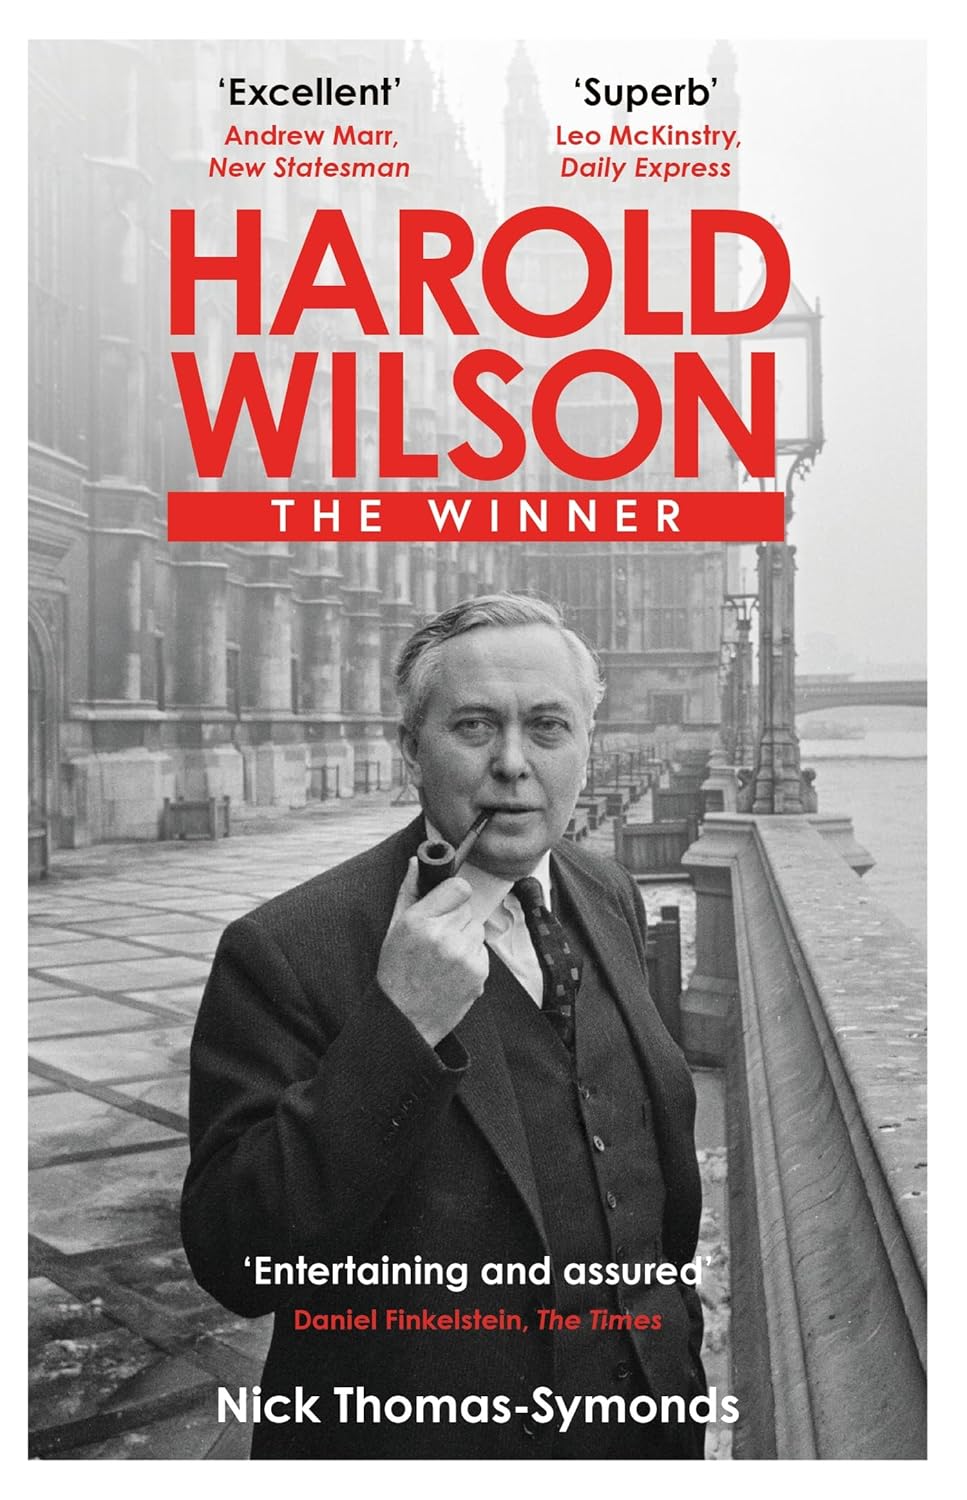 Starmer has namedropped Harold Wilson as one of his political heroes